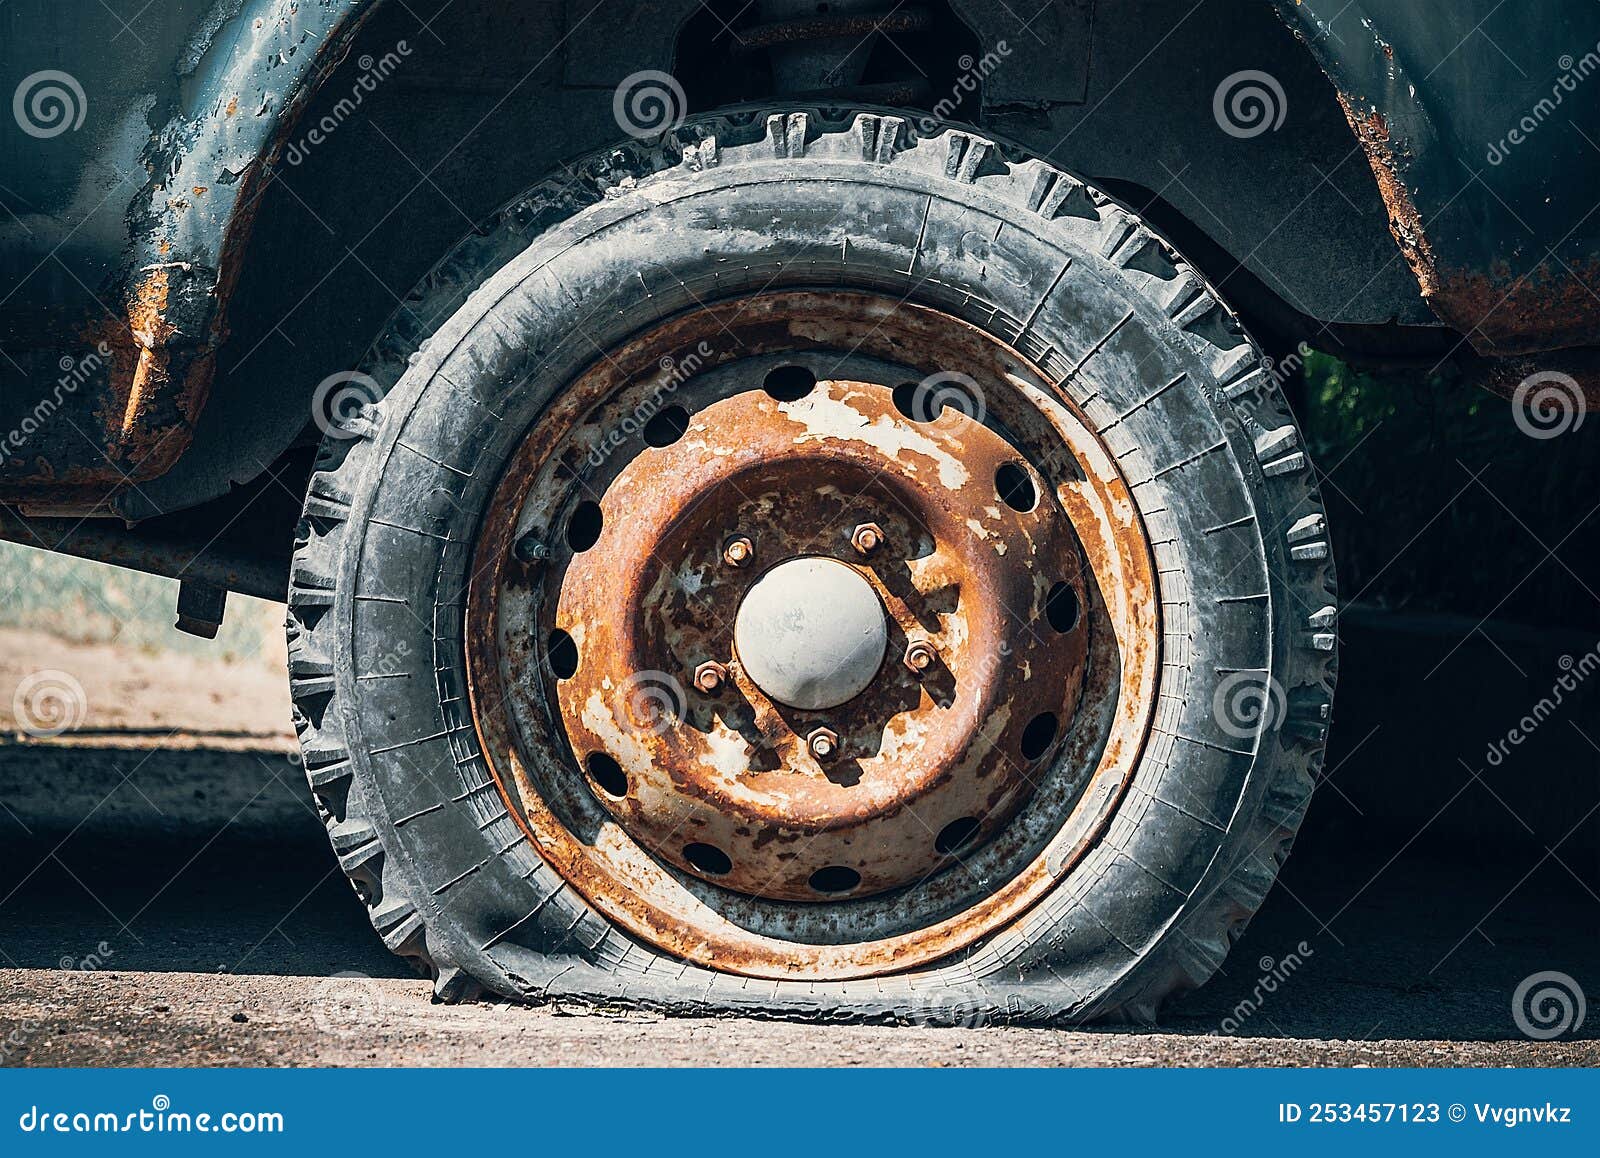 An Old Flat Tire On A Rusty Car Stock Image Image Of Side Wheel